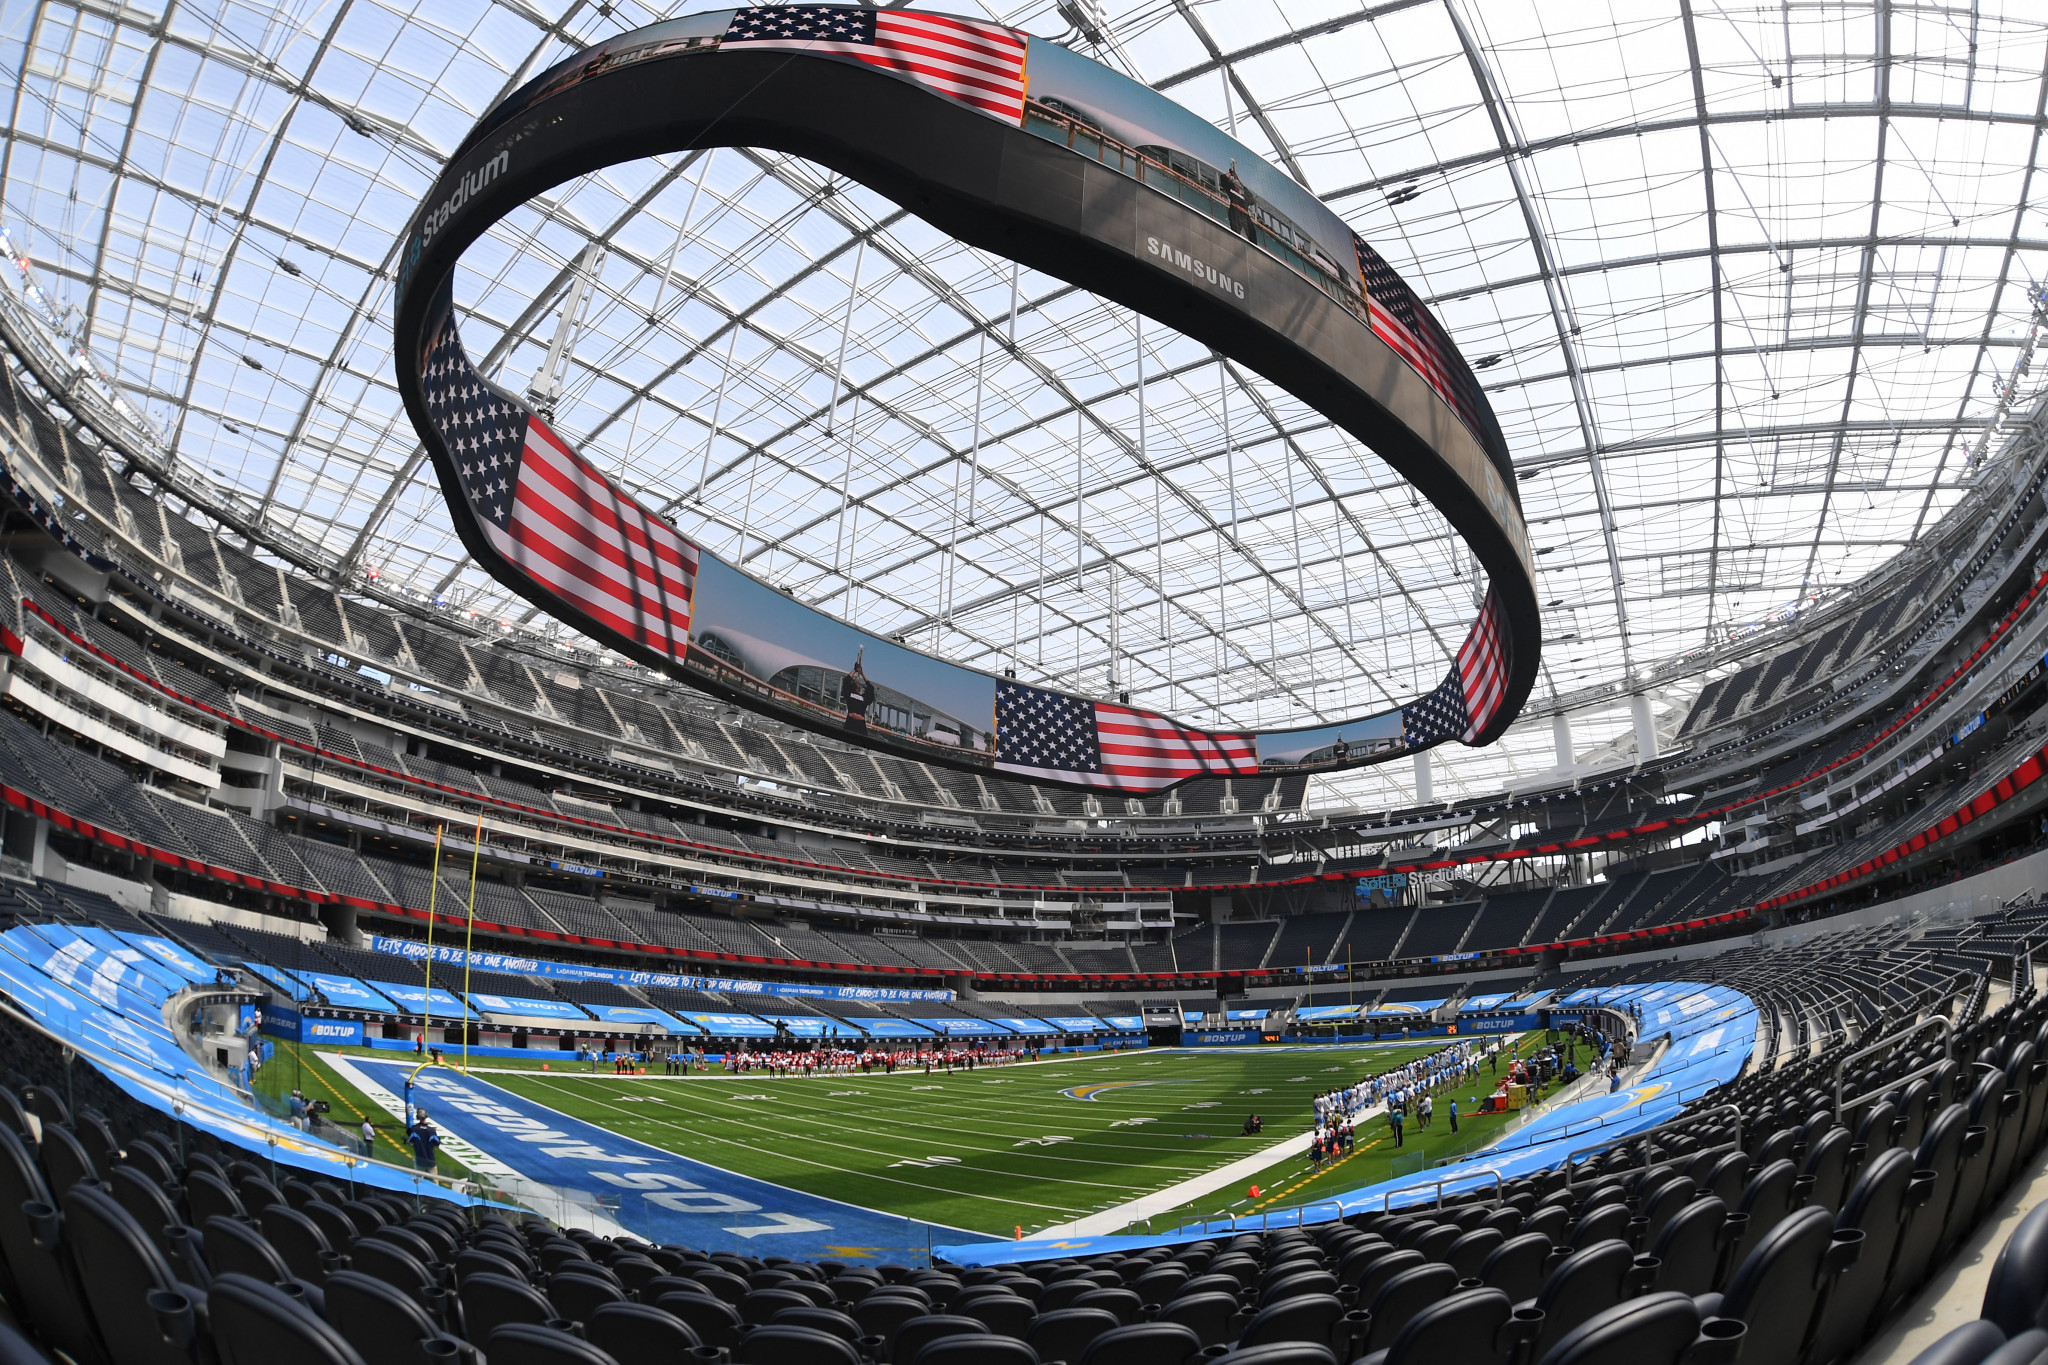 Digital twin of Los Angeles 2028 venue SoFi Stadium to be built to further data analysis